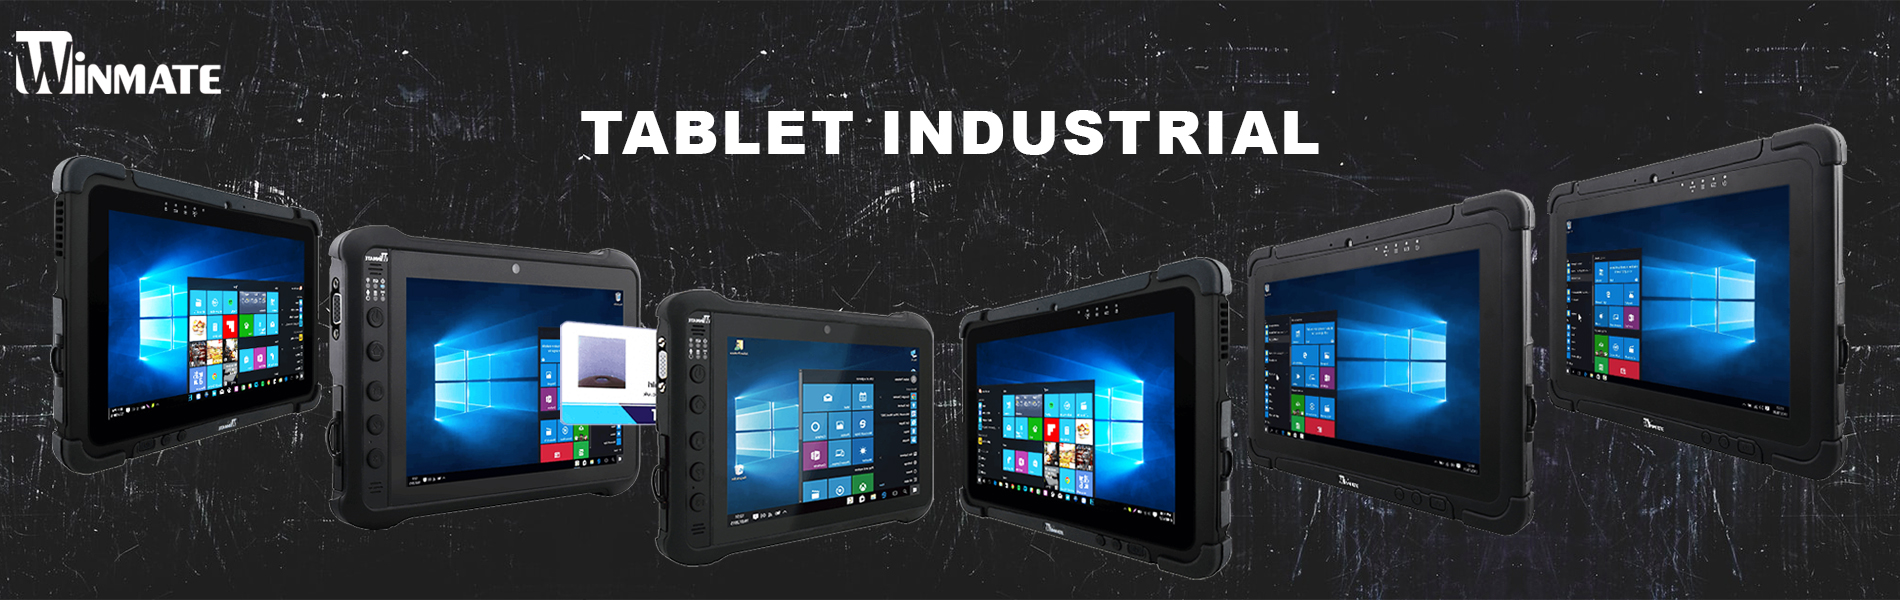 Productos-Tablet